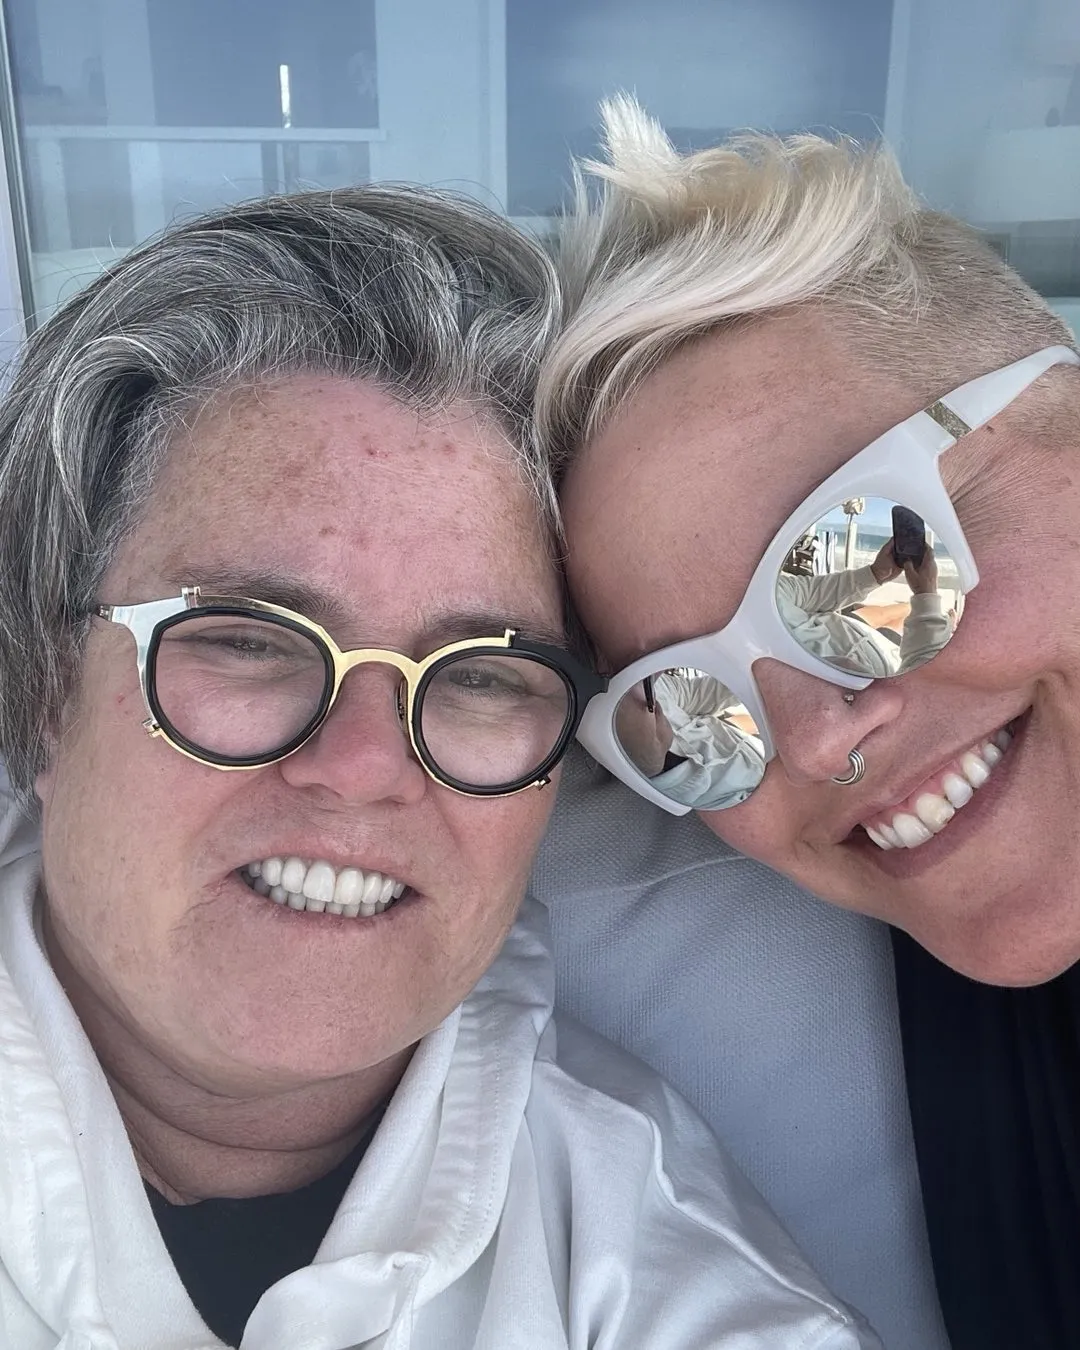 Rosie O'Donnell enjoying her time with her girlfriend, Aimee Hauer, in Malibu